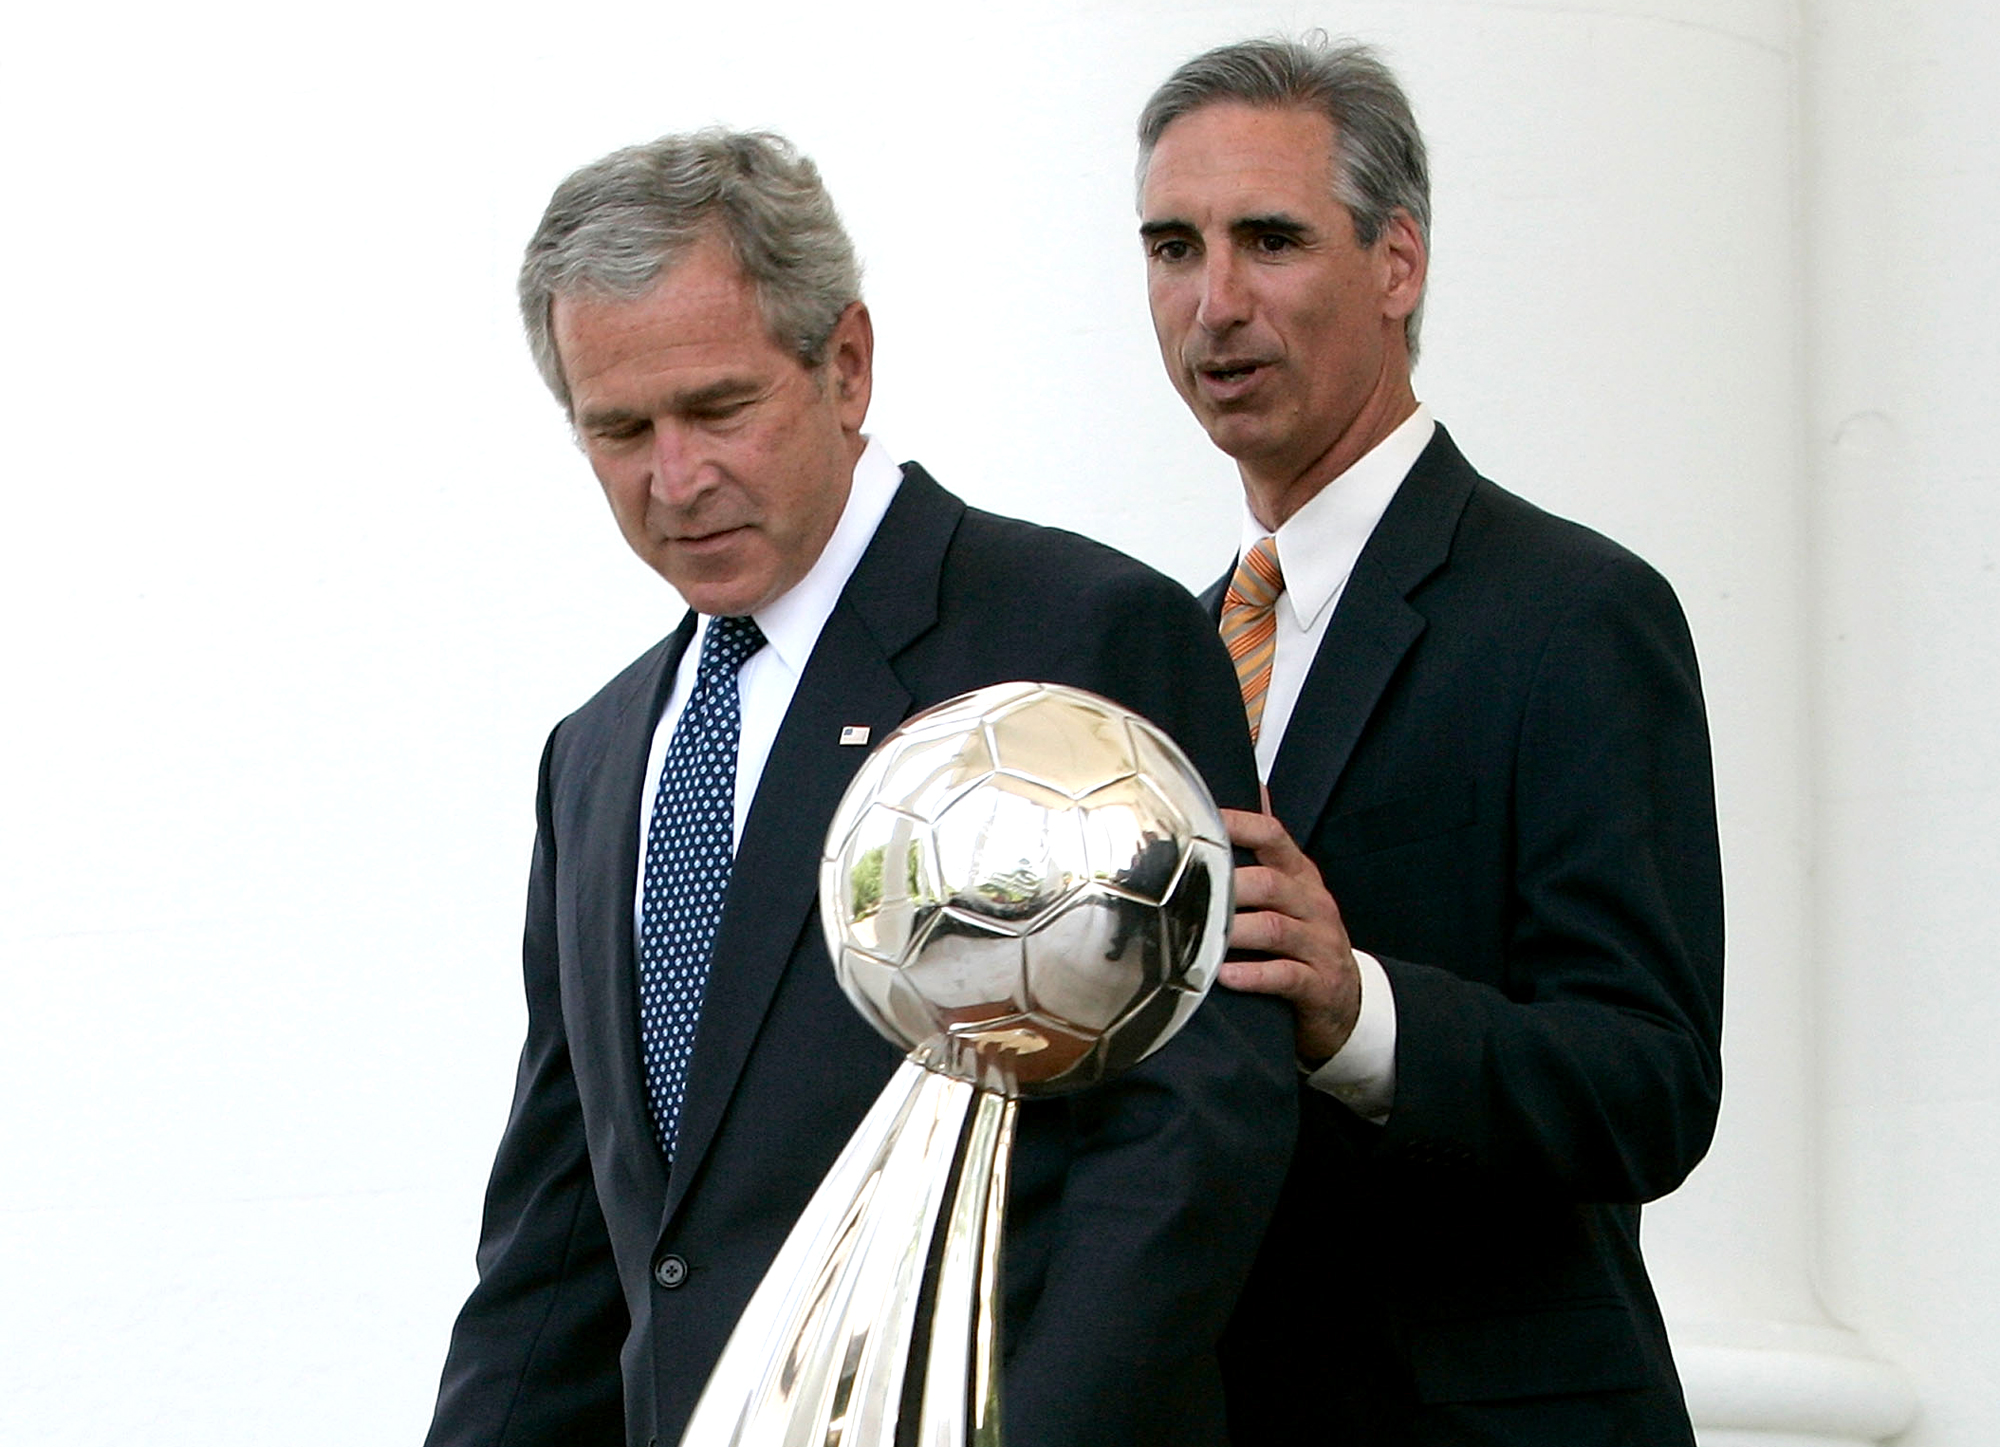 Luck and President George W. Bush with the Houston Dynamo’s 2006 MLS Cup trophy, one of two MLS titles the team won during Luck’s tenure as GM.  